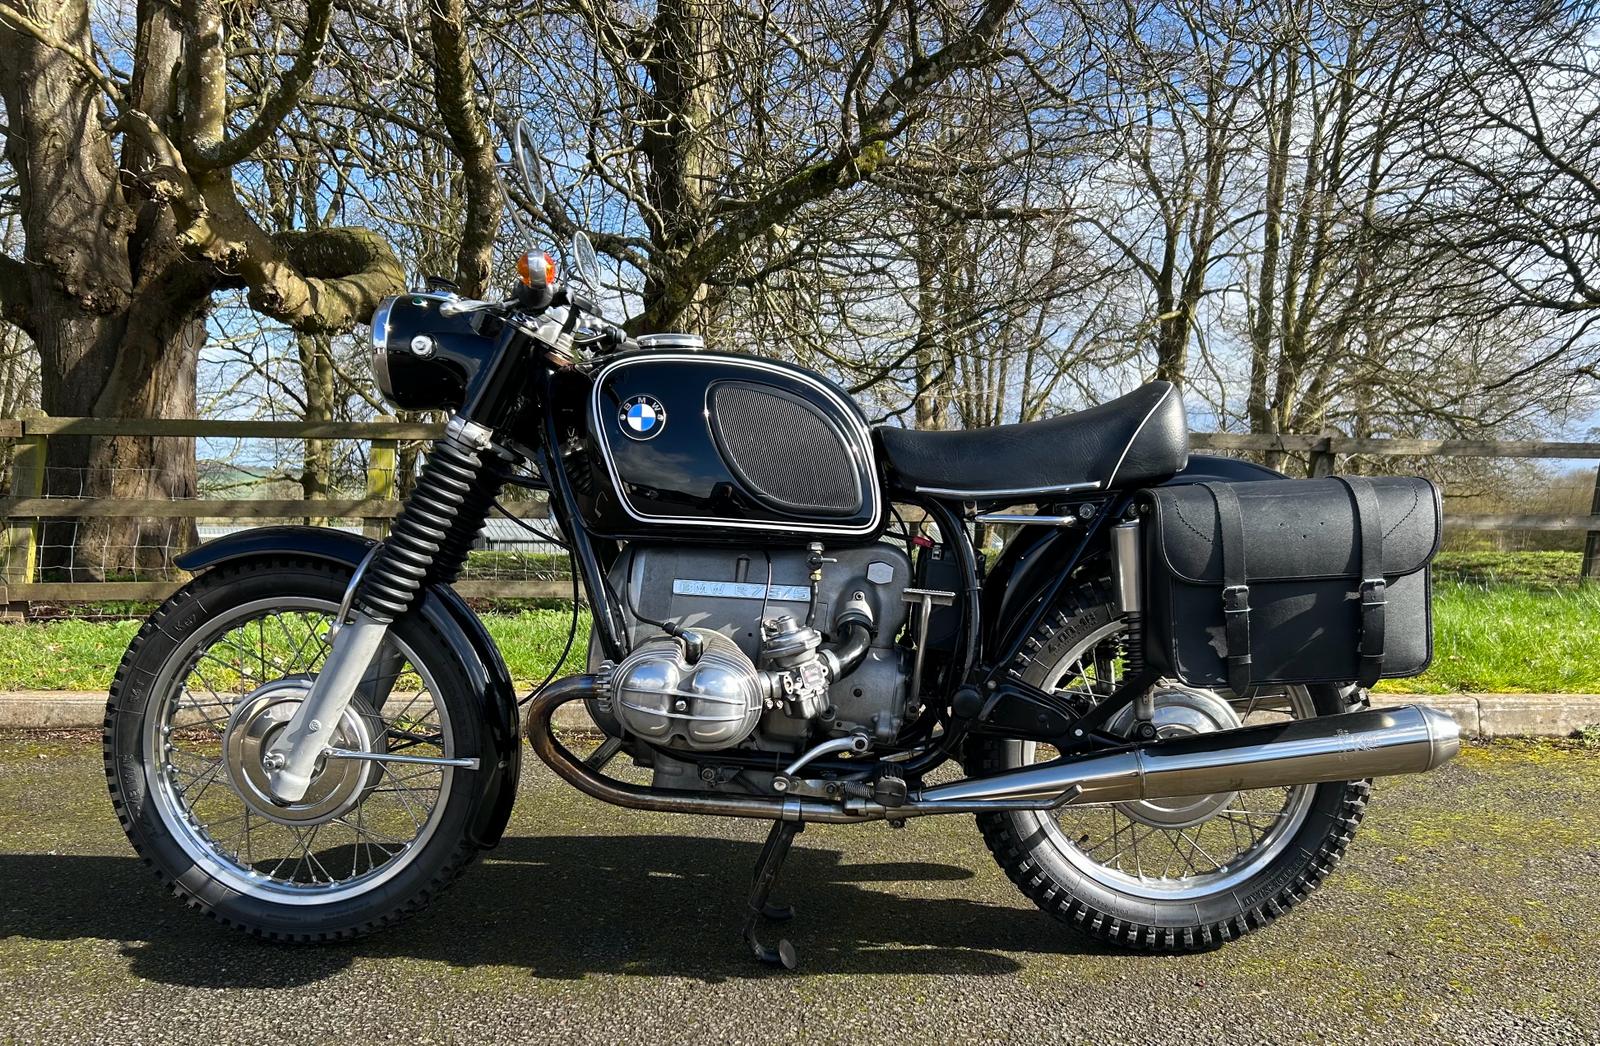 A BMW R75/5 MOTORCYCLE .1971. 72452 MILES. EXCELLENT WELL RESTORED CONDITION, V5, MOT AND TAX - Image 12 of 17